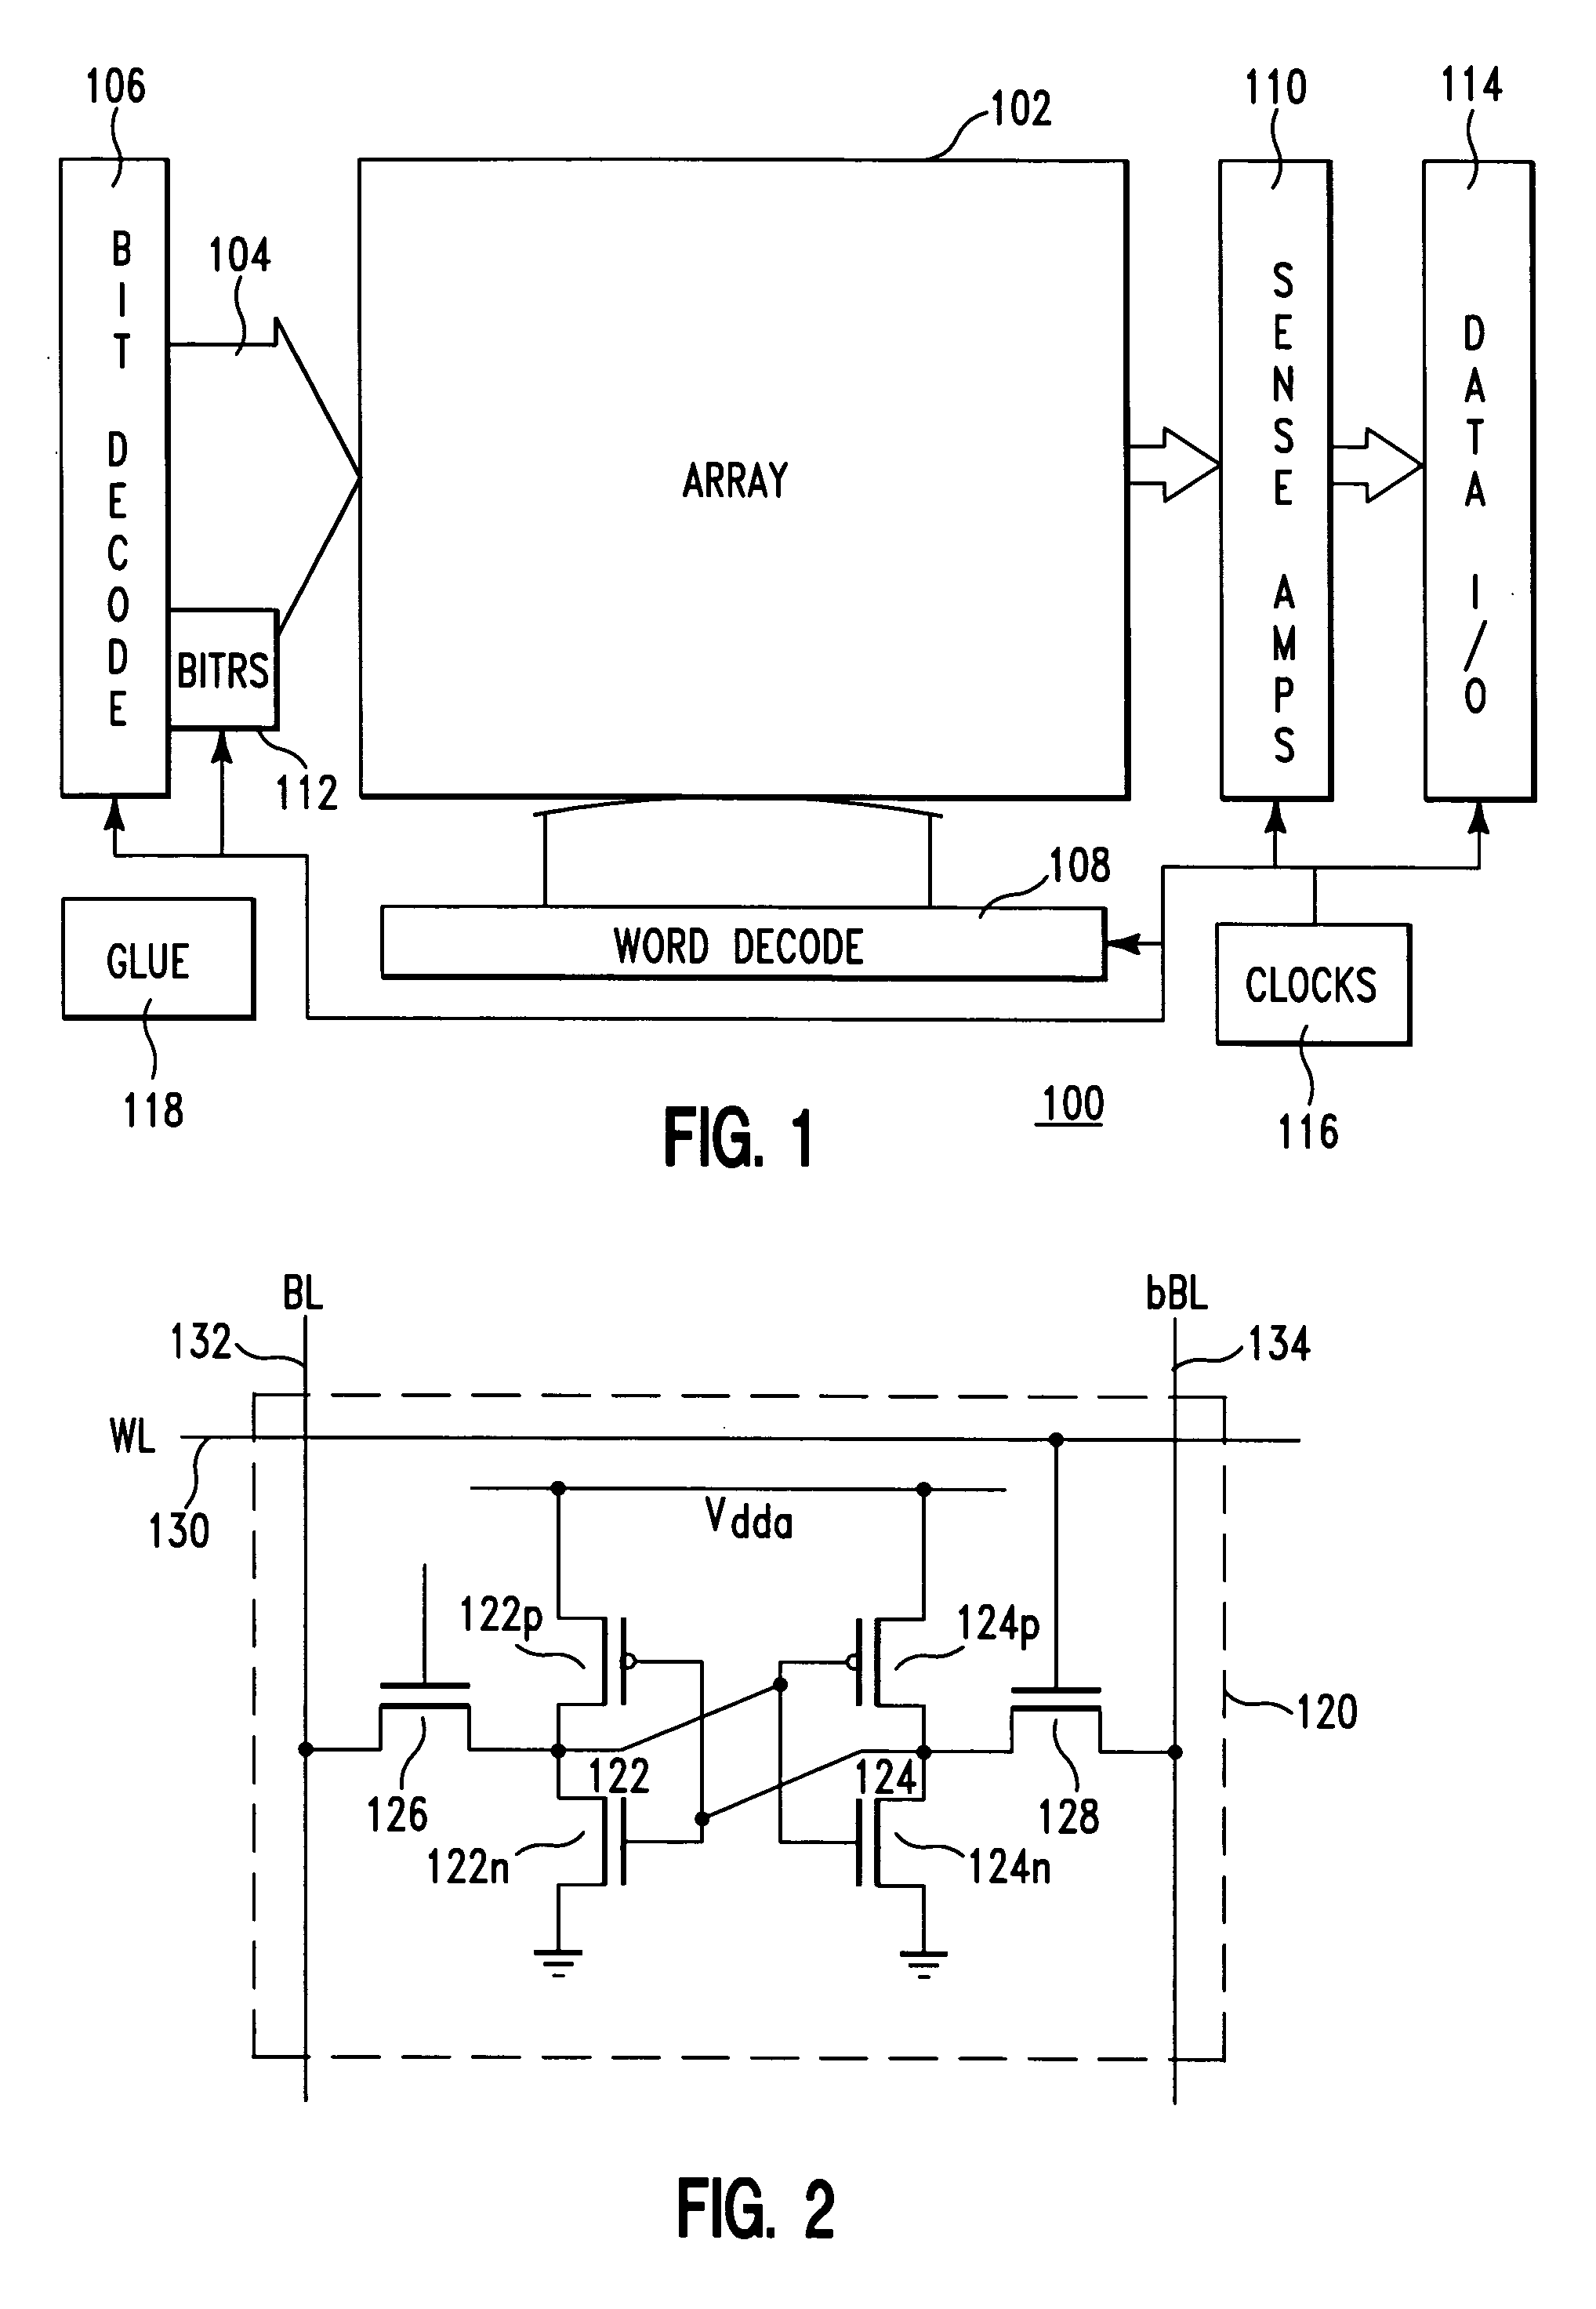 SRAM array with improved cell stability